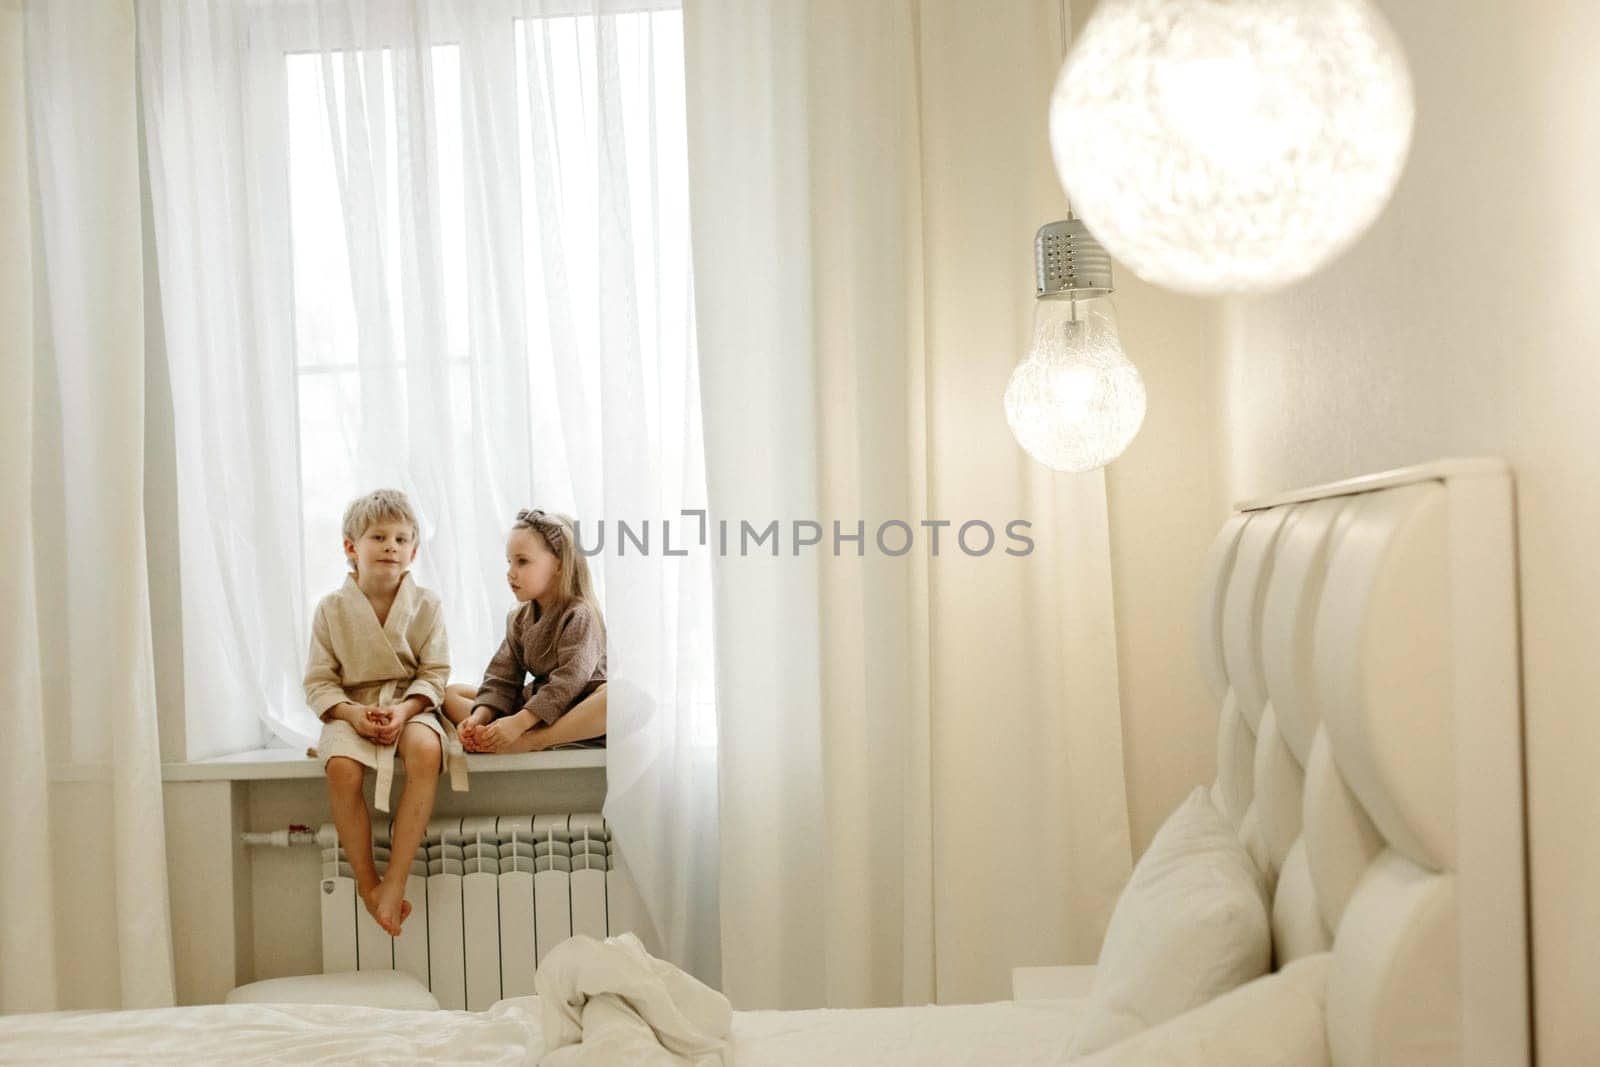 A boy and a girl are sitting on the windowsill in the bedroom.